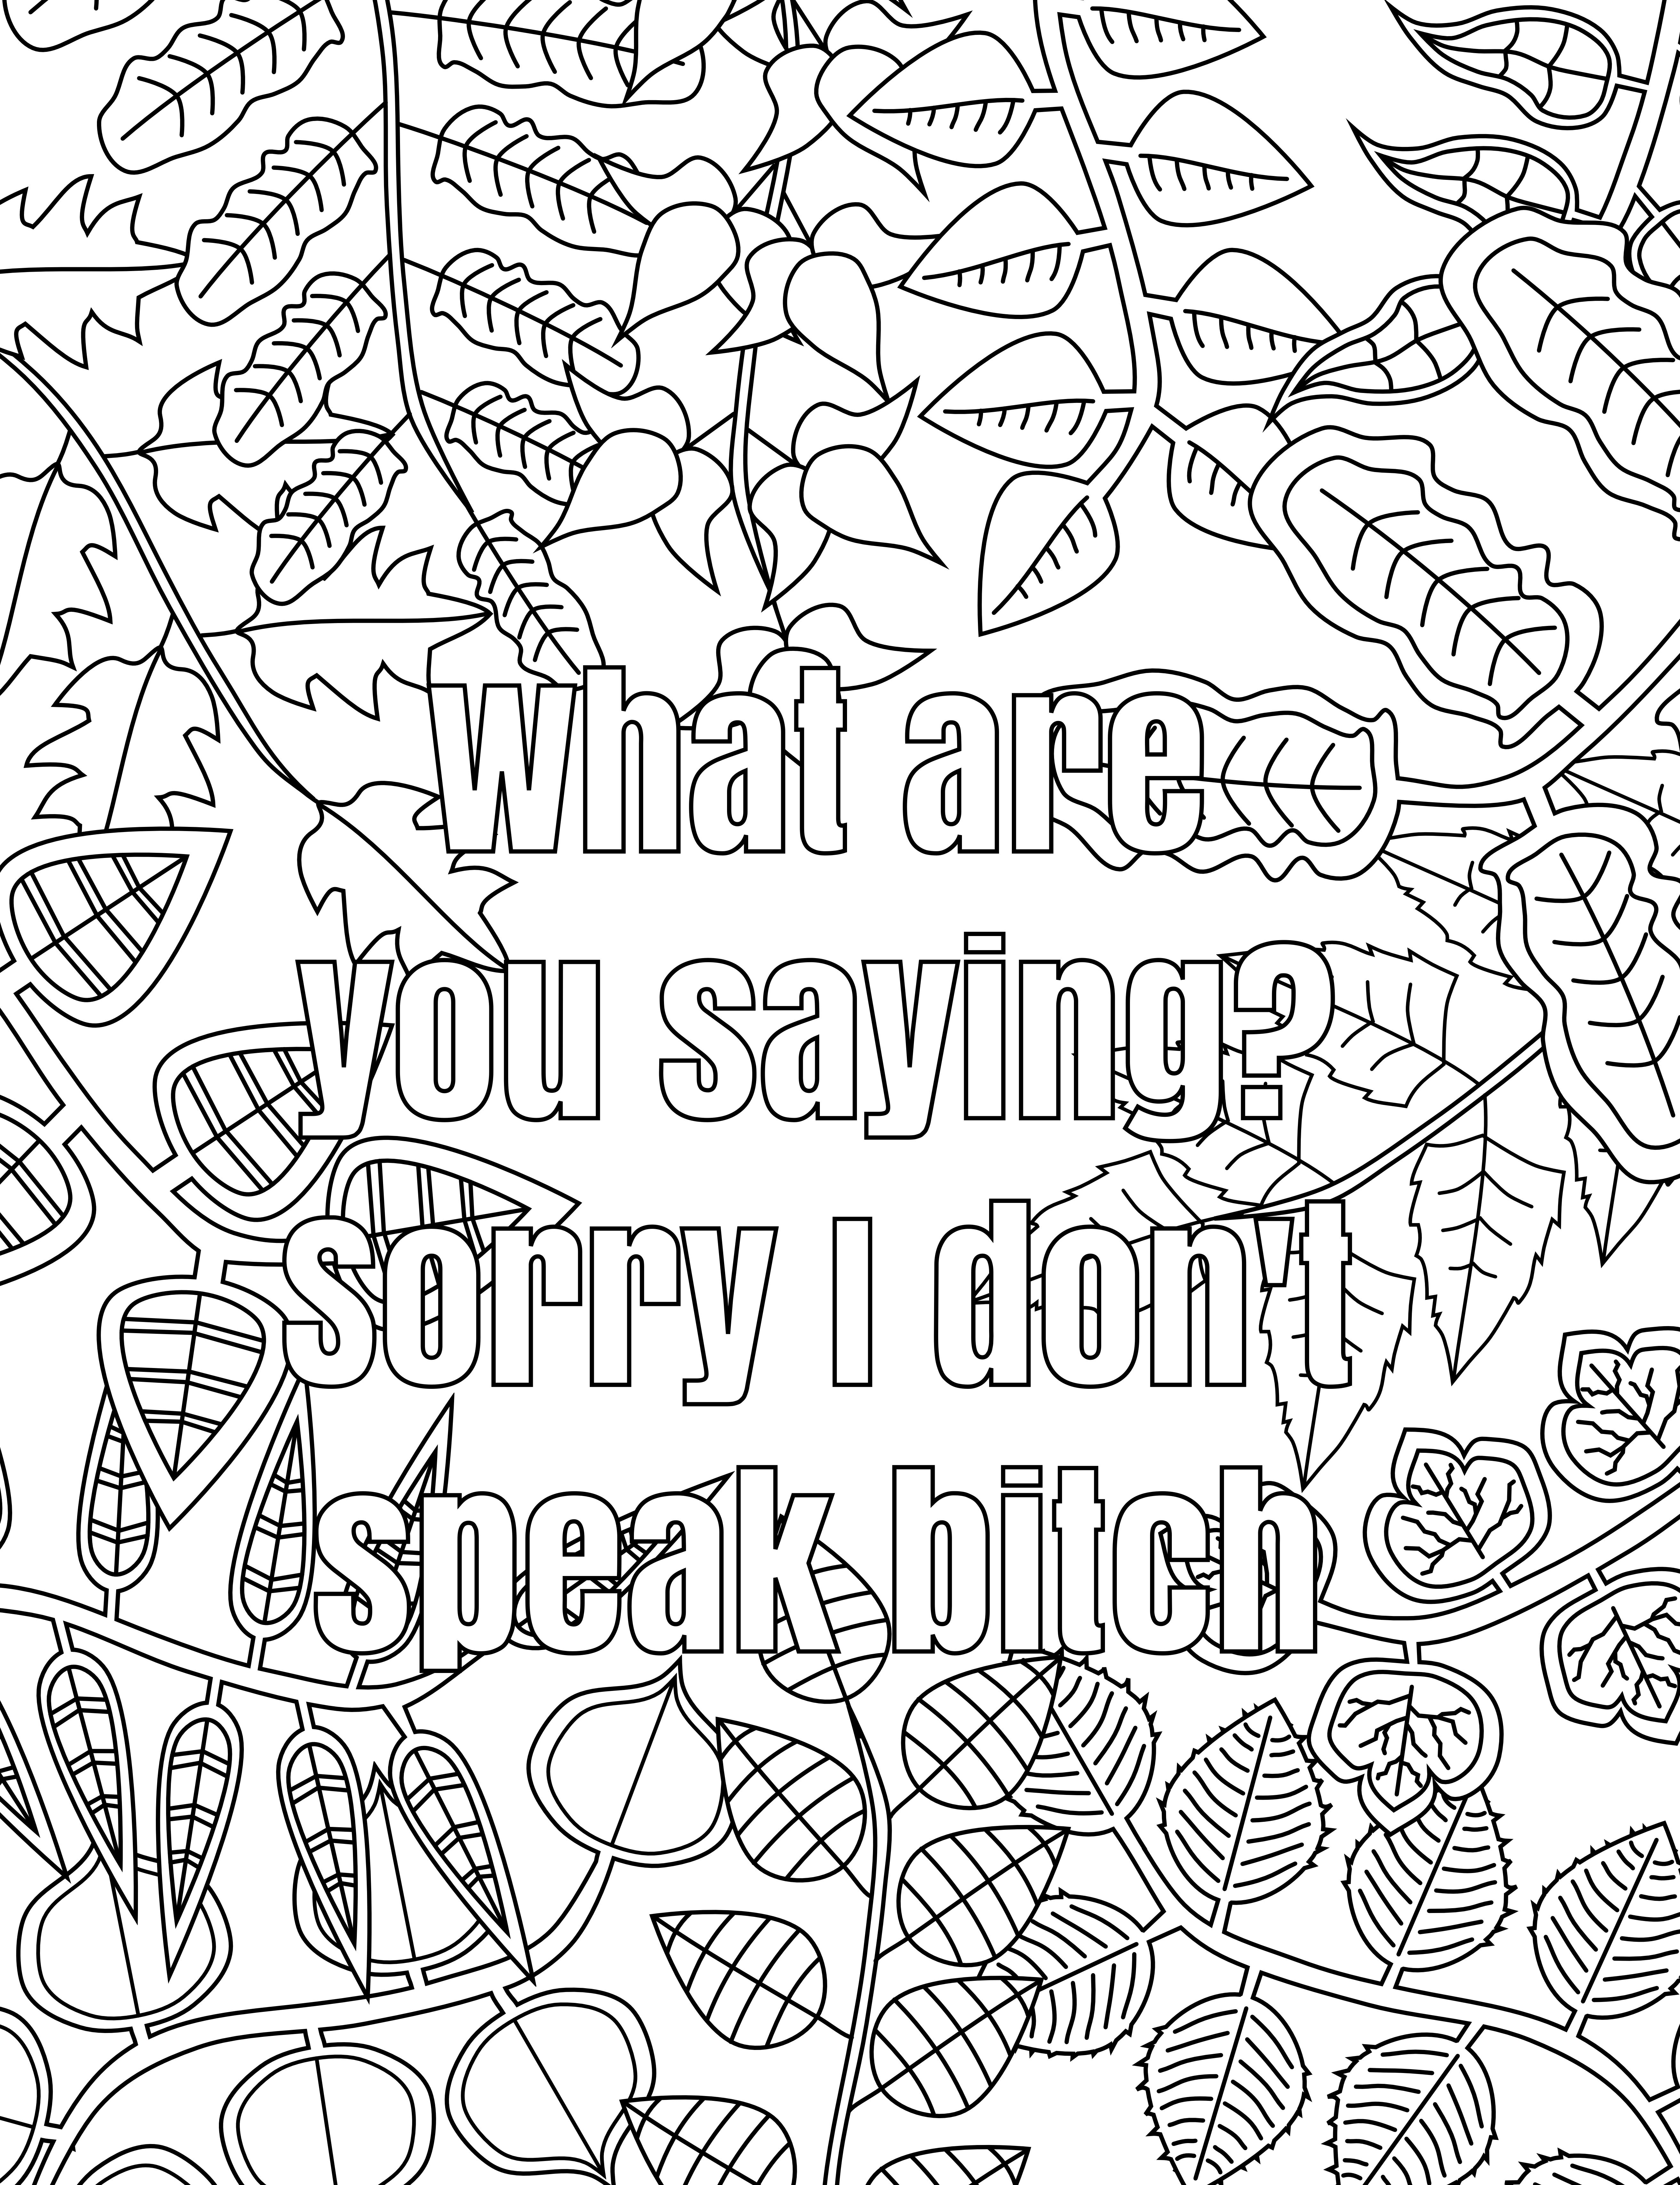 Free Printable Coloring Pages For Adults Only Swear Words Download - Free Printable Coloring Pages For Adults Only Swear Words